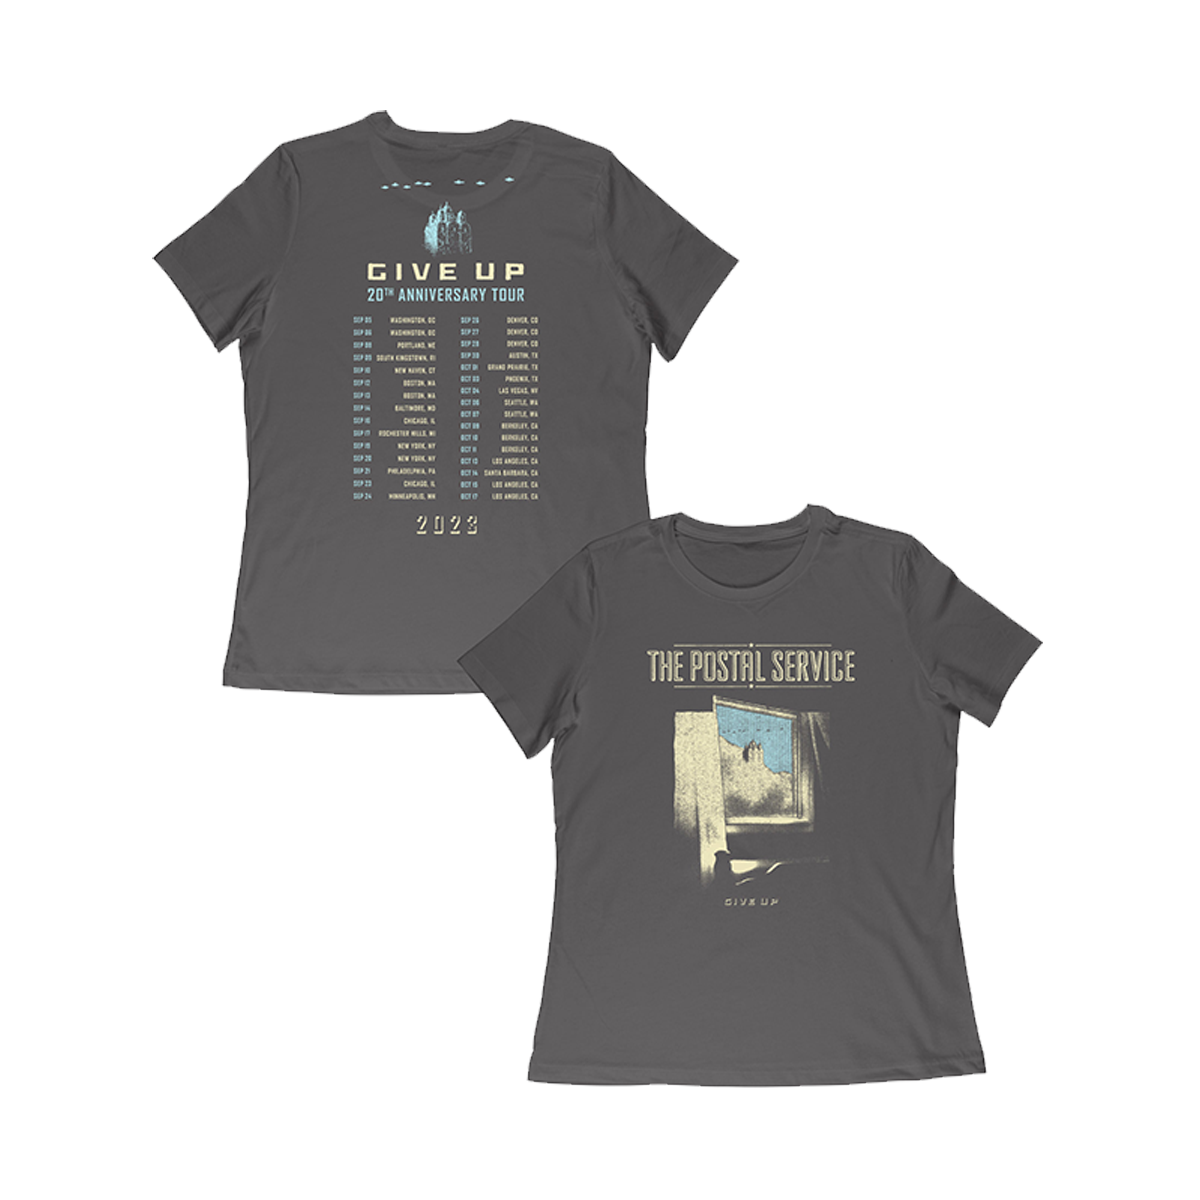 Give Up Album Cover Womens Tour Tee